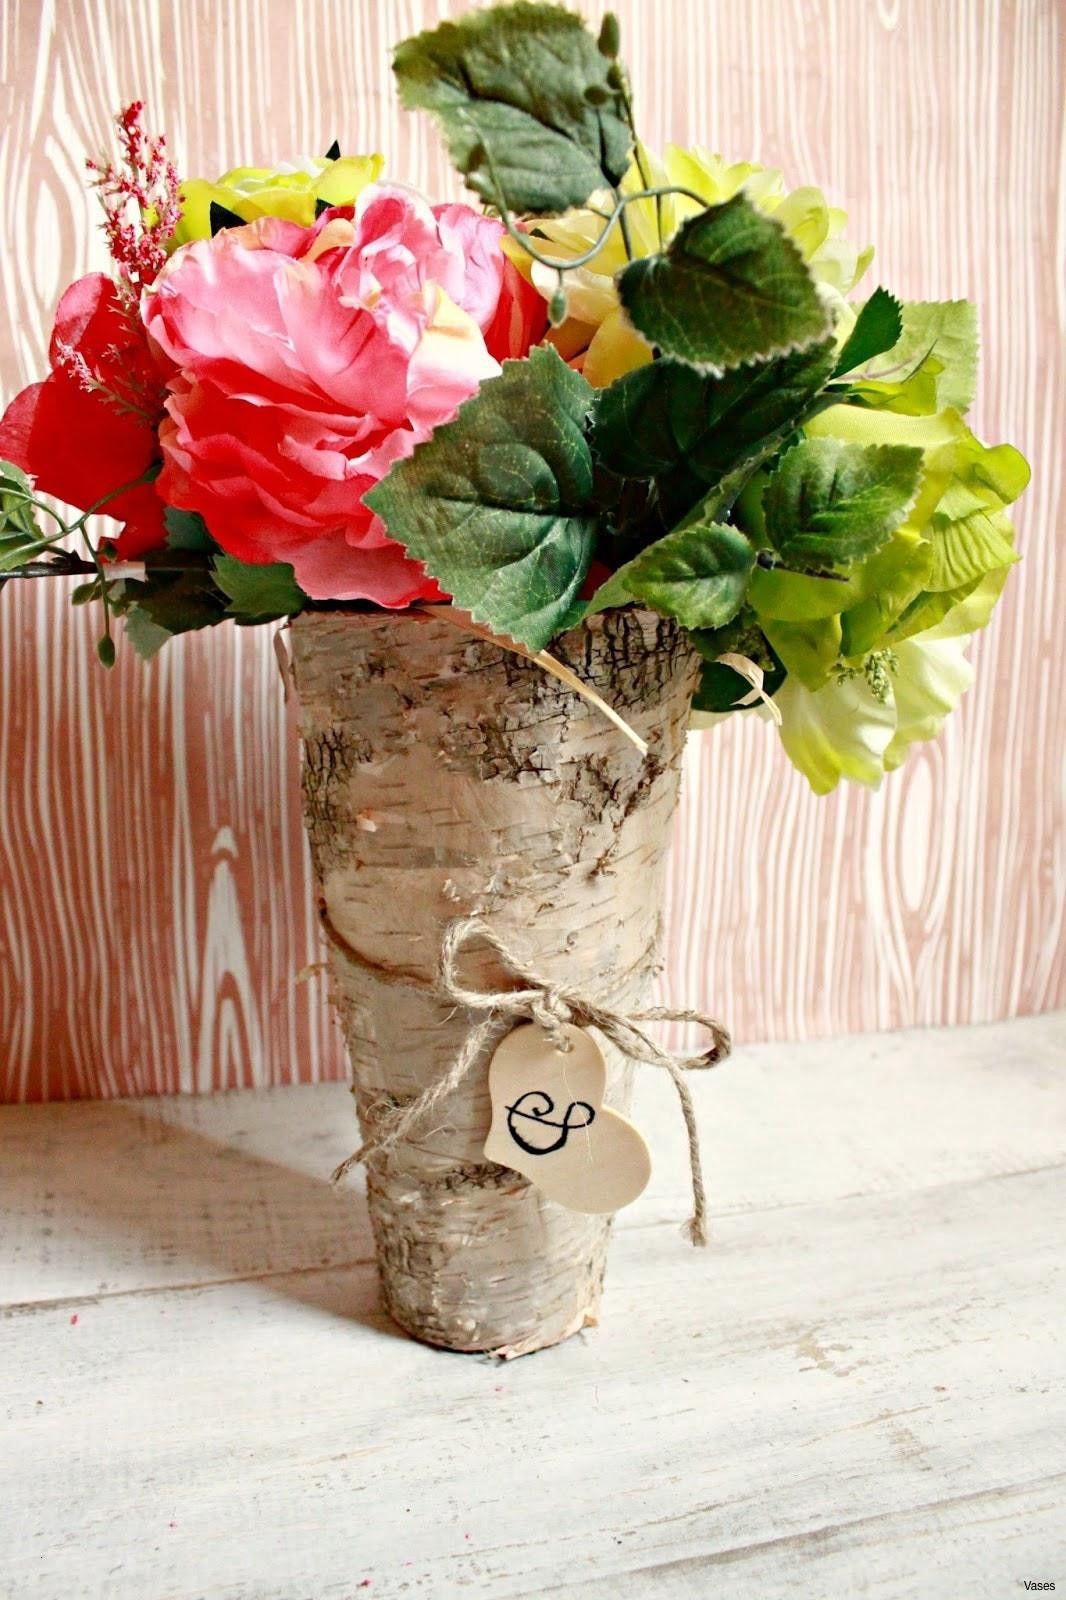 10 Elegant Guest Book Vase 2024 free download guest book vase of the wedding decoration ideas diy collections economyinnbeebe com throughout fall wedding decoration ideas best flowers and decorations for weddings h vases diy wood vase